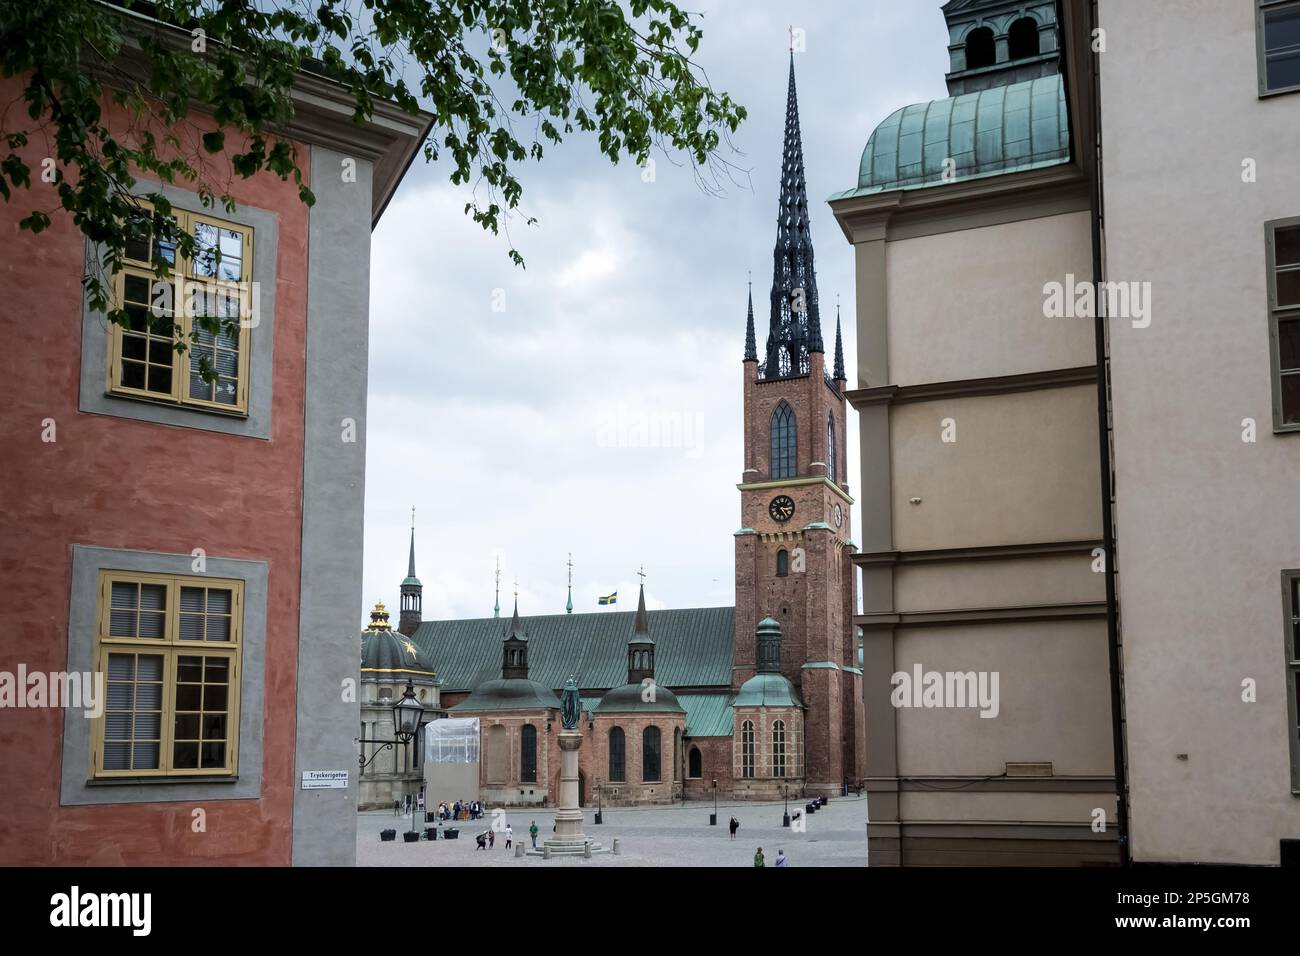 View of Riddarholmen Church, final resting place of most Swedish monarchs, located in Gamla Stan, medieval city center of Stockholm Stock Photo